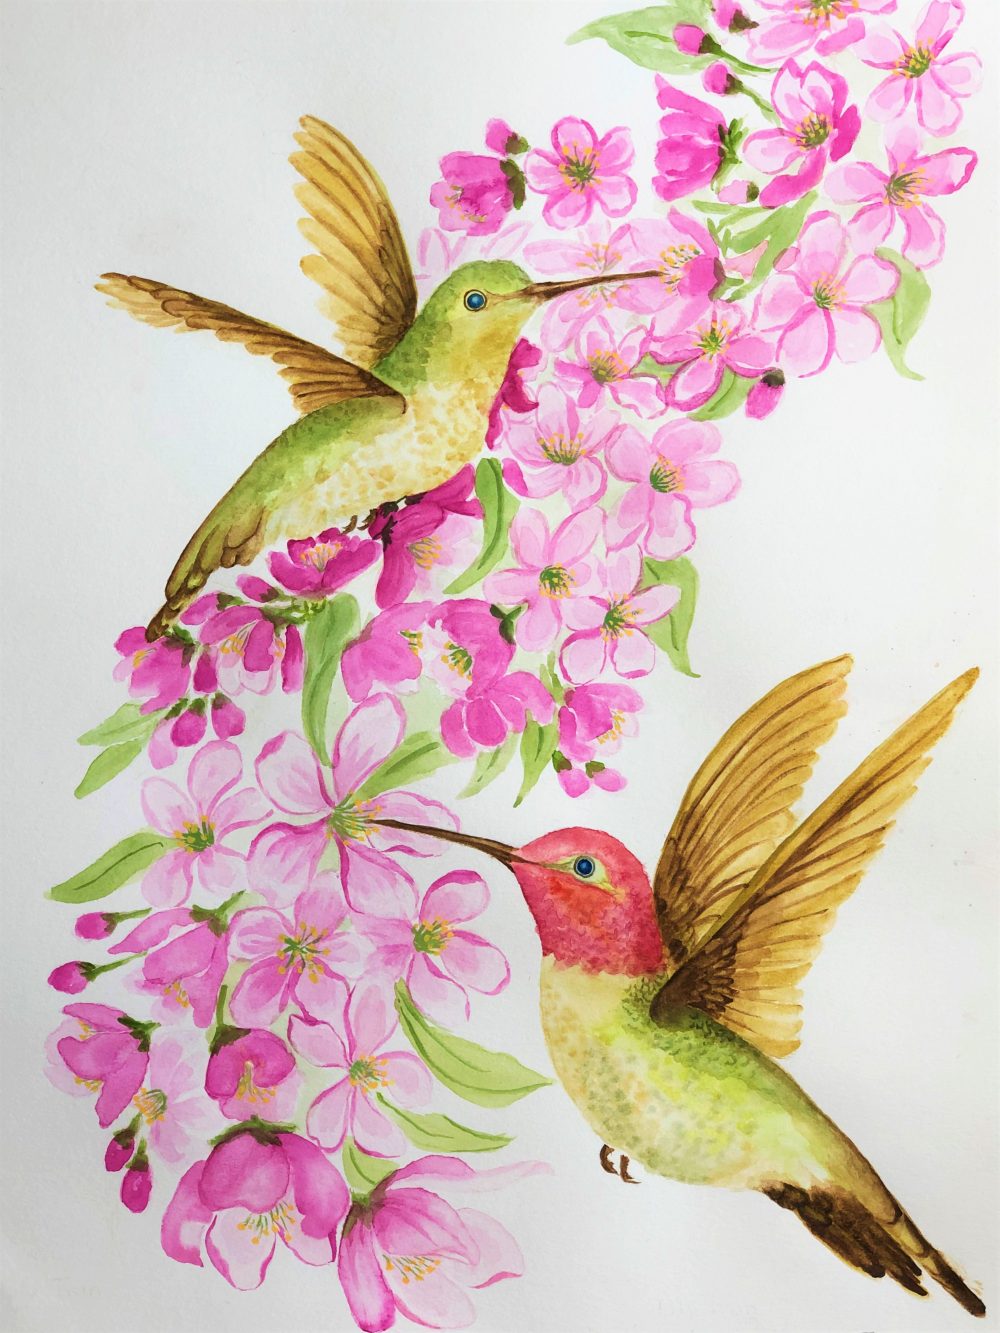 Two hummingbirds flying in front of a cluster of pink flowers.